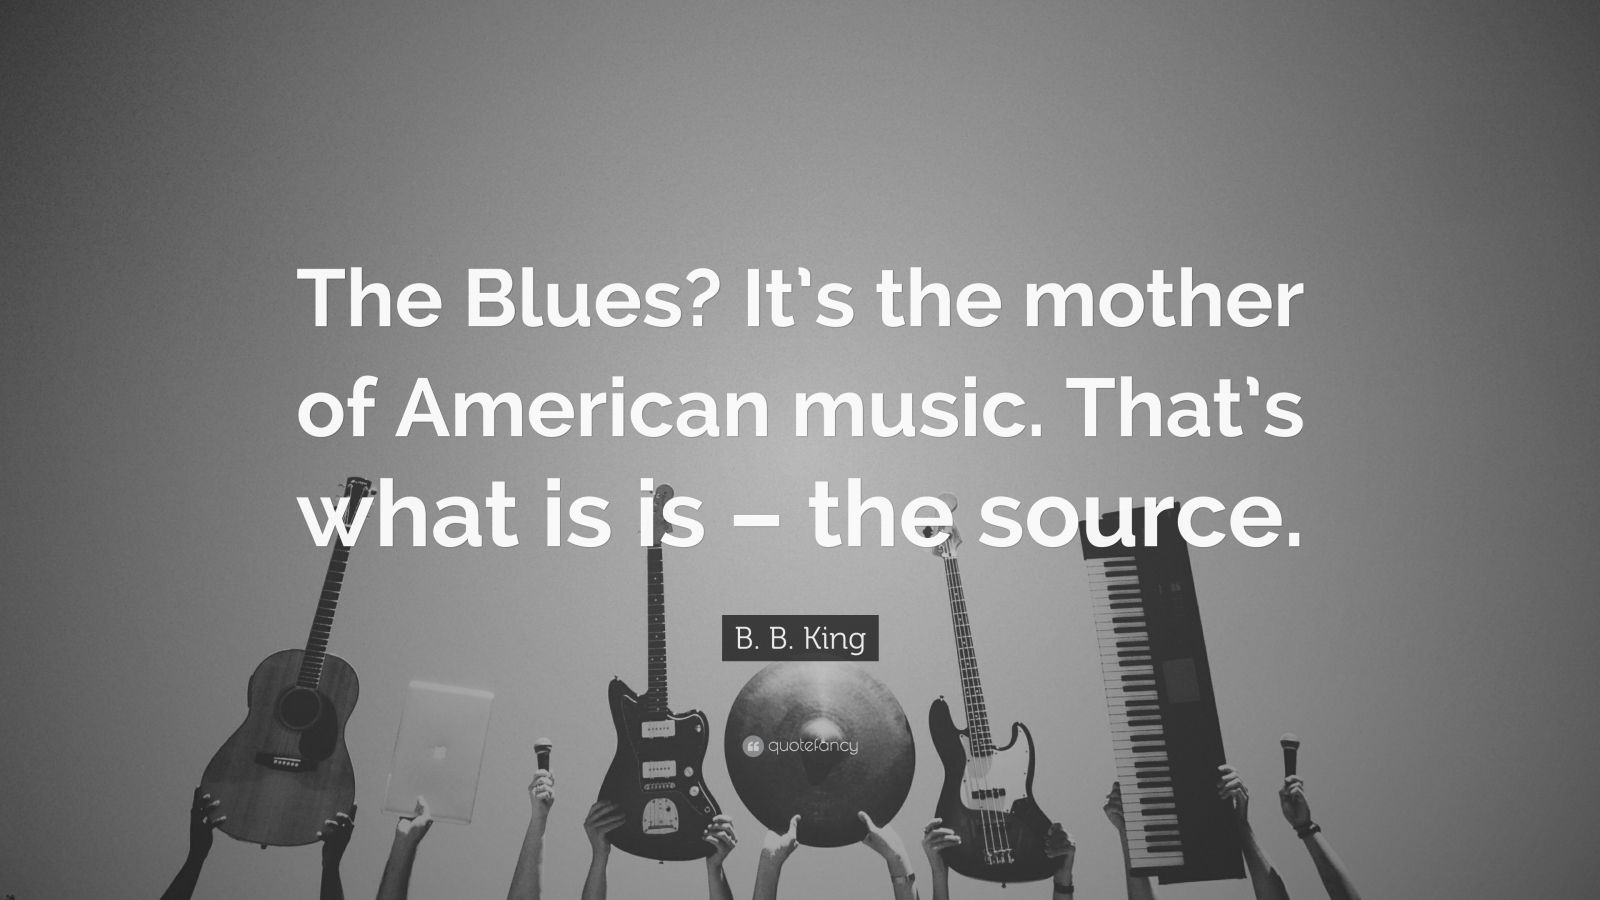 Blues Quote - Muddy Waters Quote: "The blues had a baby and they called